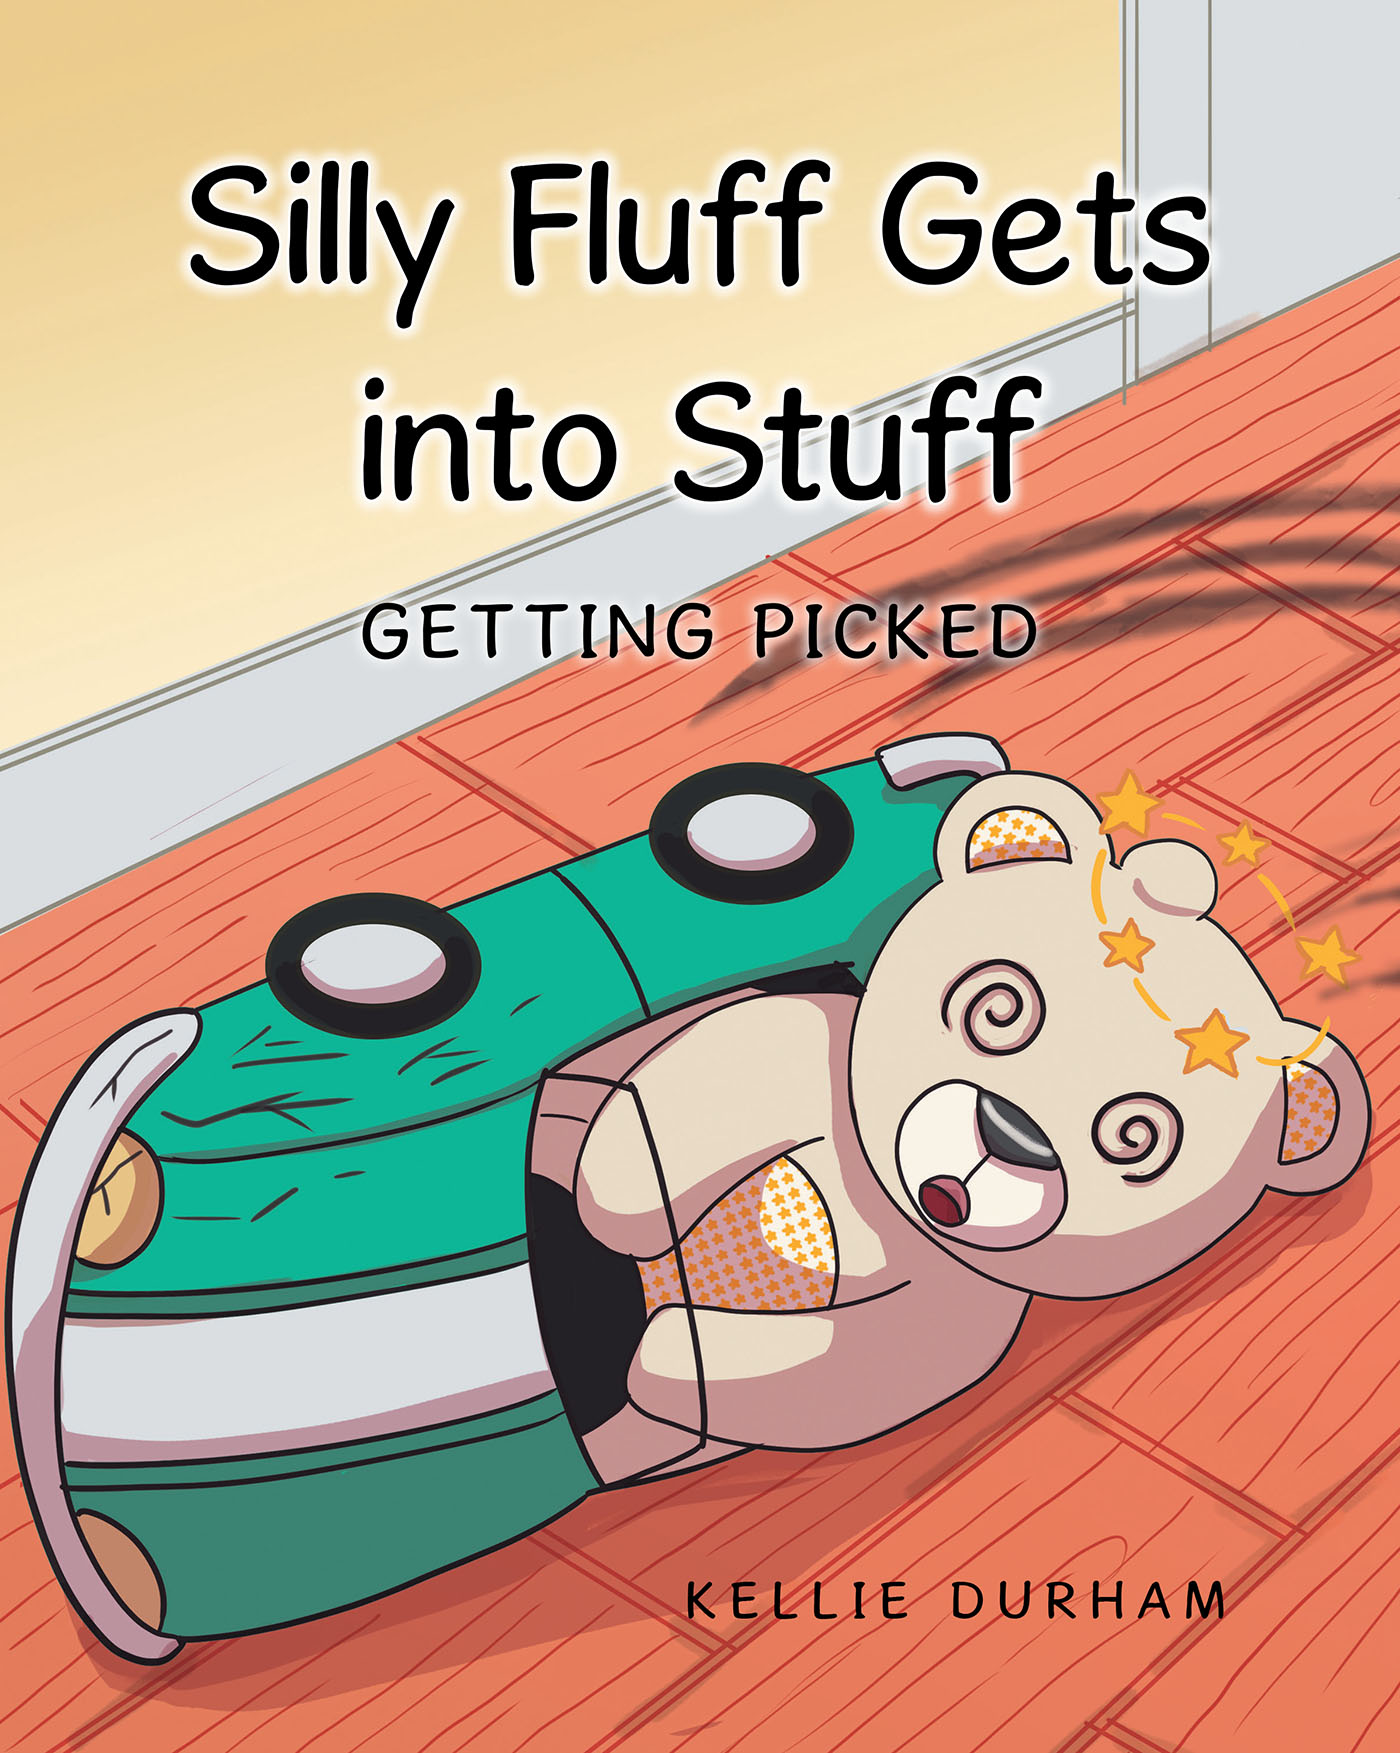 Author Kellie Durham’s New Book, "Silly Fluff Gets into Stuff: Getting Picked," is a Rollicking Tale Following a Teddy Bear on Many Adventures with His New Family